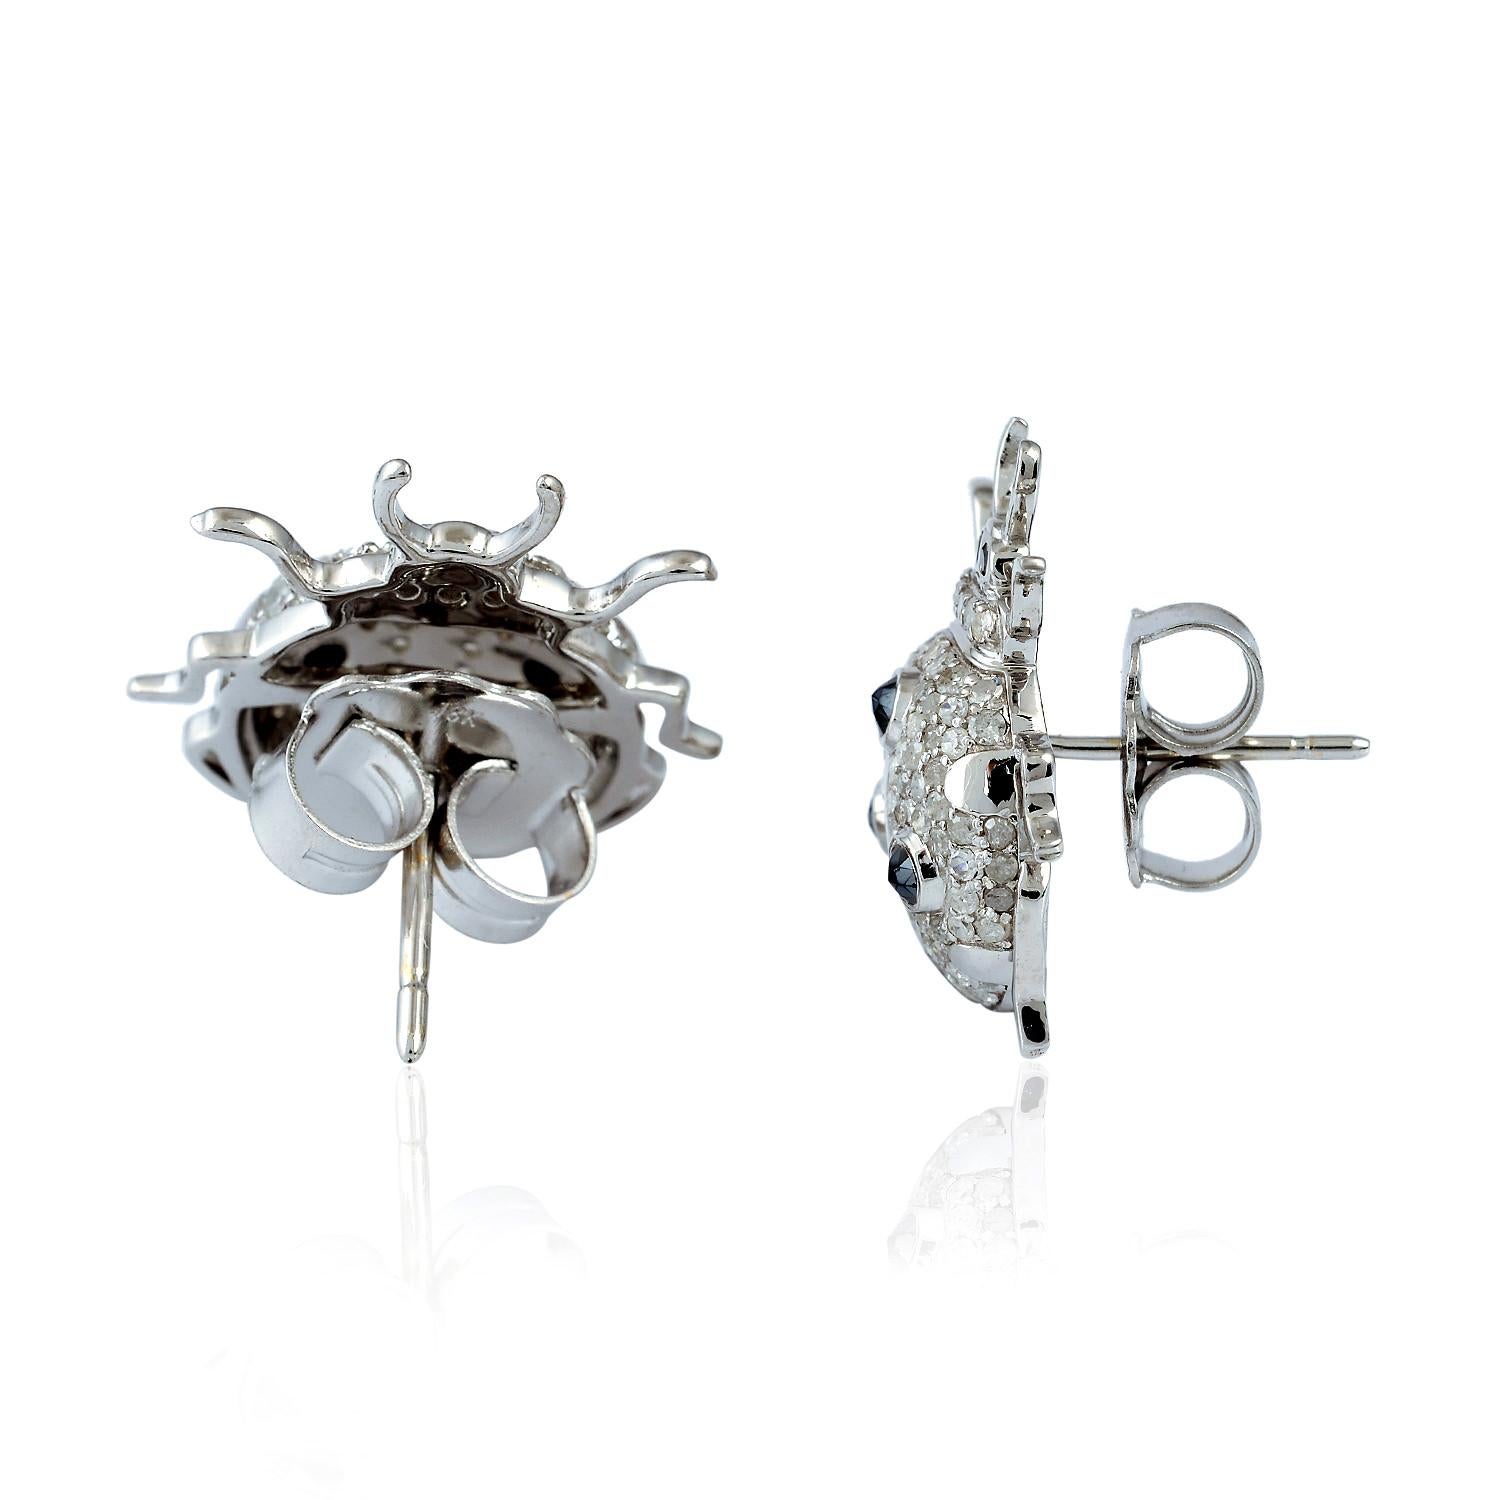 Cast in 18K gold and sterling silver.  This beetle stud earrings are set in .45 carats black spinel and 0.92 carats of sparkling diamonds.

FOLLOW  MEGHNA JEWELS storefront to view the latest collection & exclusive pieces.  Meghna Jewels is proudly